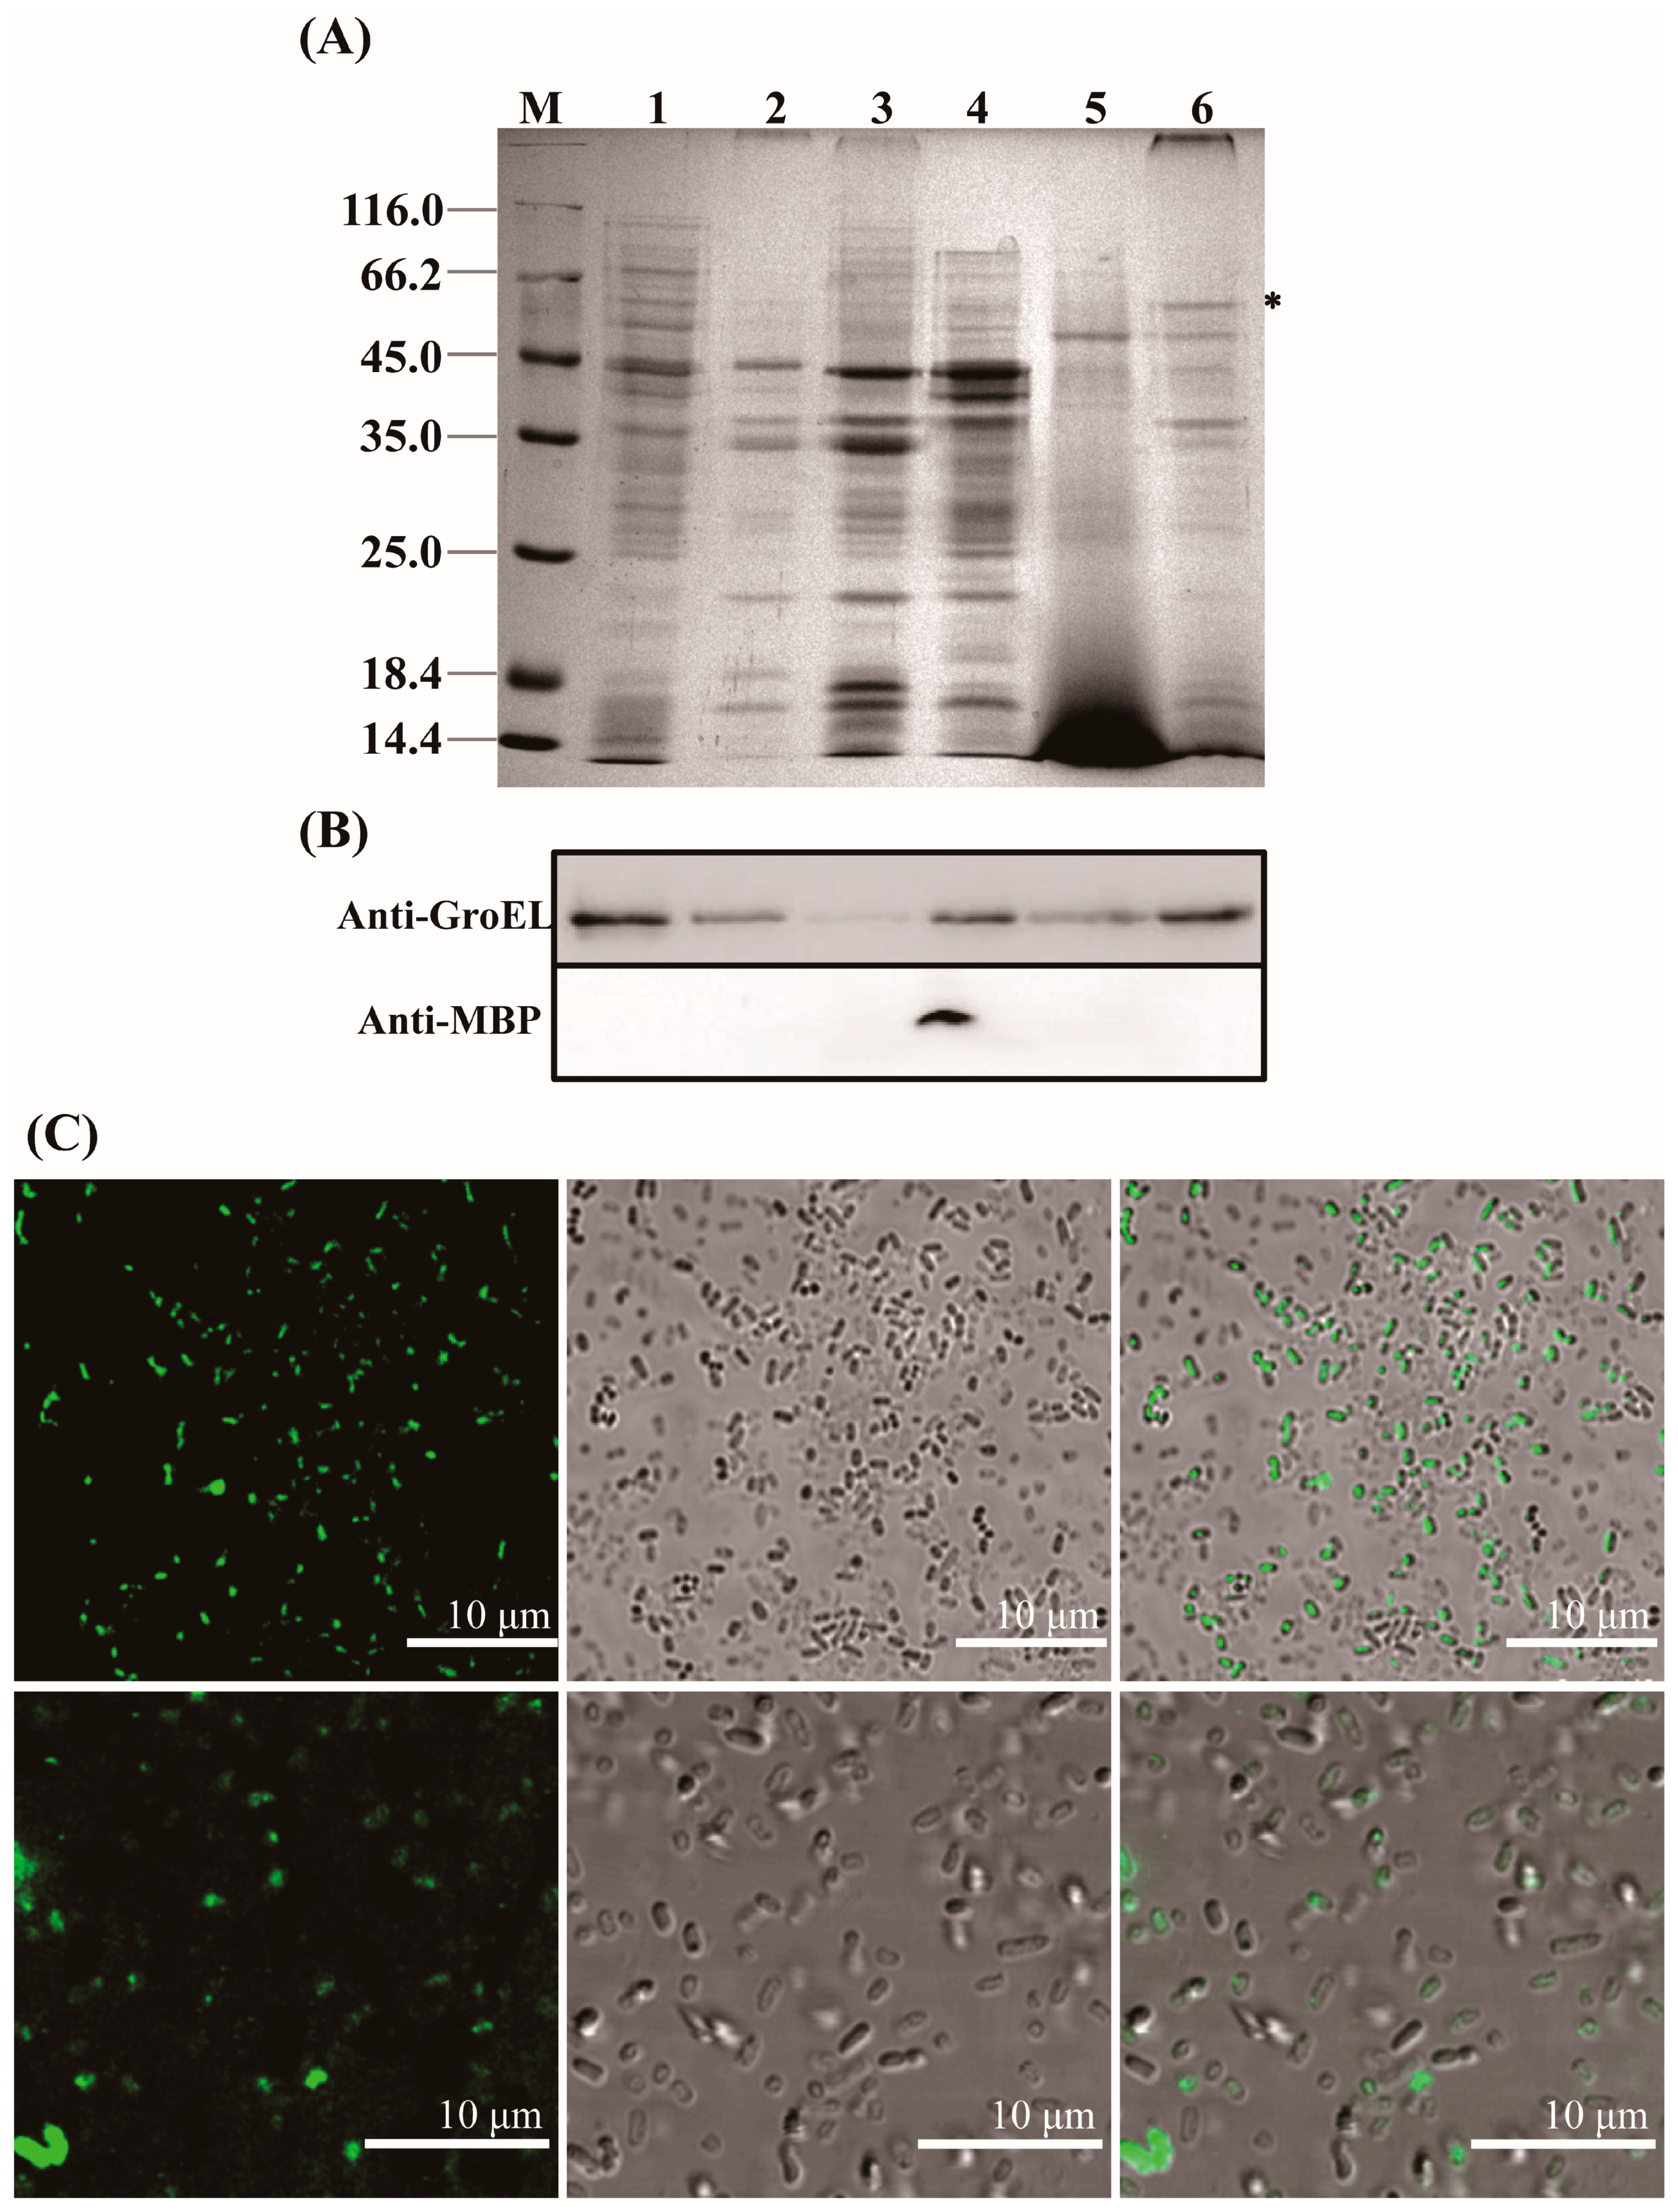 Cytotoxicity profile of Cronobacter species isolated from food and